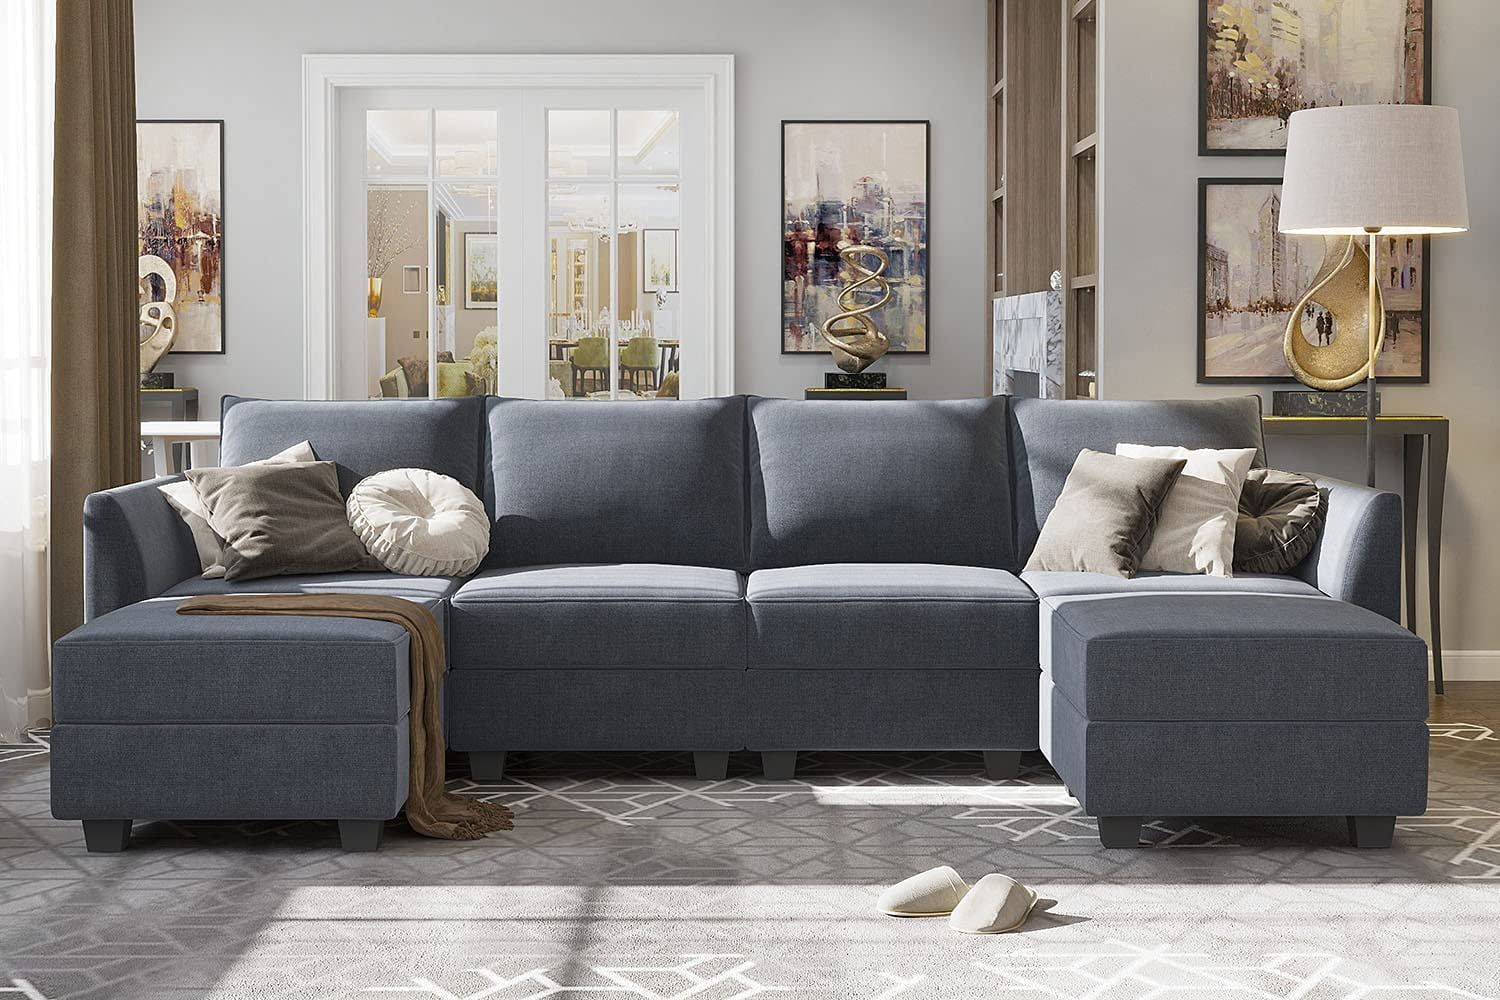 Honbay Sectional Couch With Reversible Chaise Modern L Shape Sofa 4 For Sofas In Bluish Grey (Gallery 6 of 20)